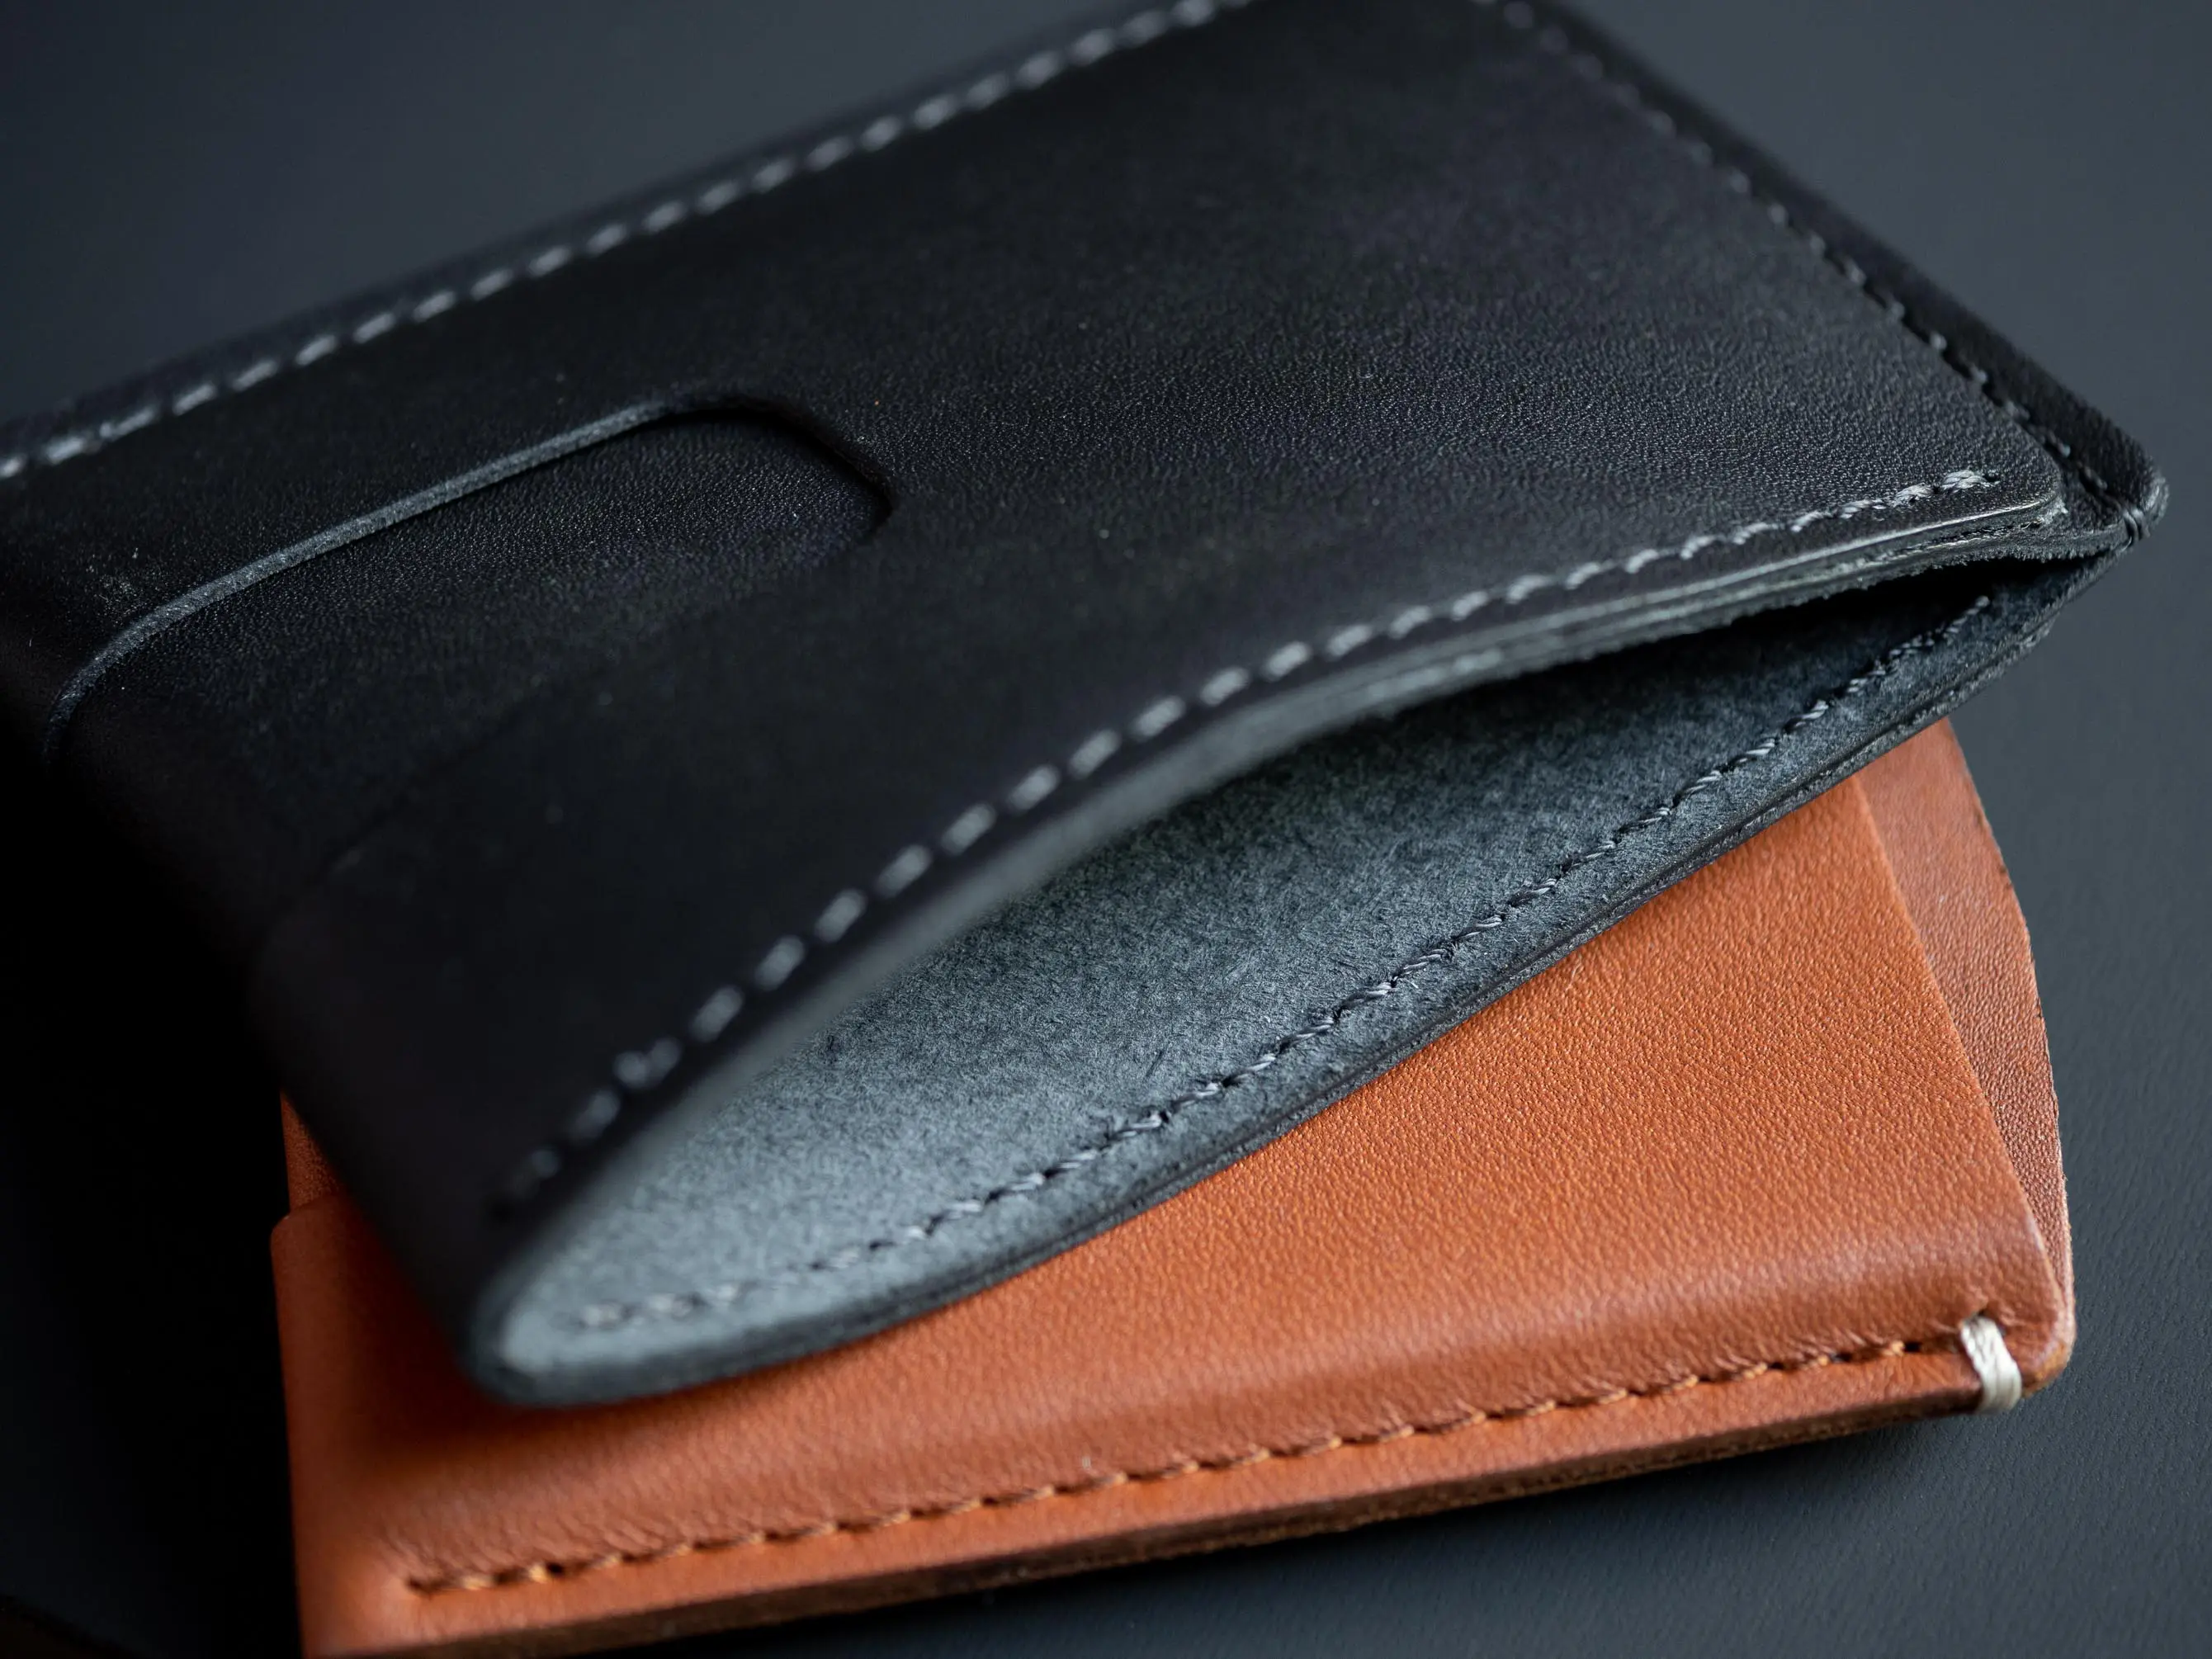 Black and brown calfskin leather